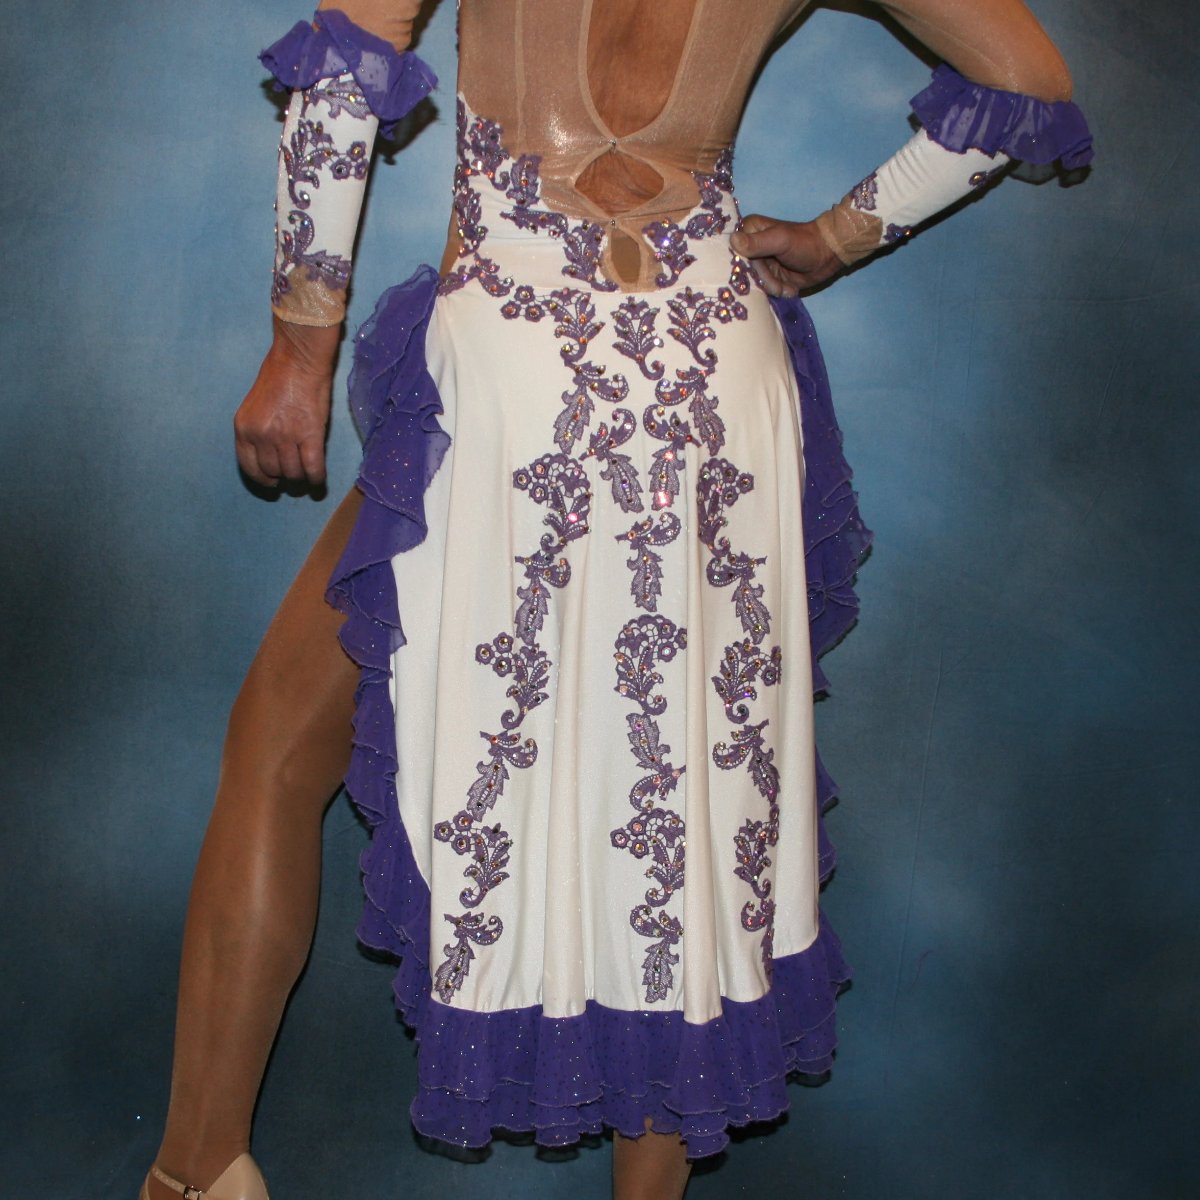 lower back view of White Latin/rhythm dress created with purple lace motifs embellished with crystal Aurora borealis Swarovski rhinestones overlaid on white lycra, and on nude illusion. The finishing touch are ruffles of glitter flecked chiffon.